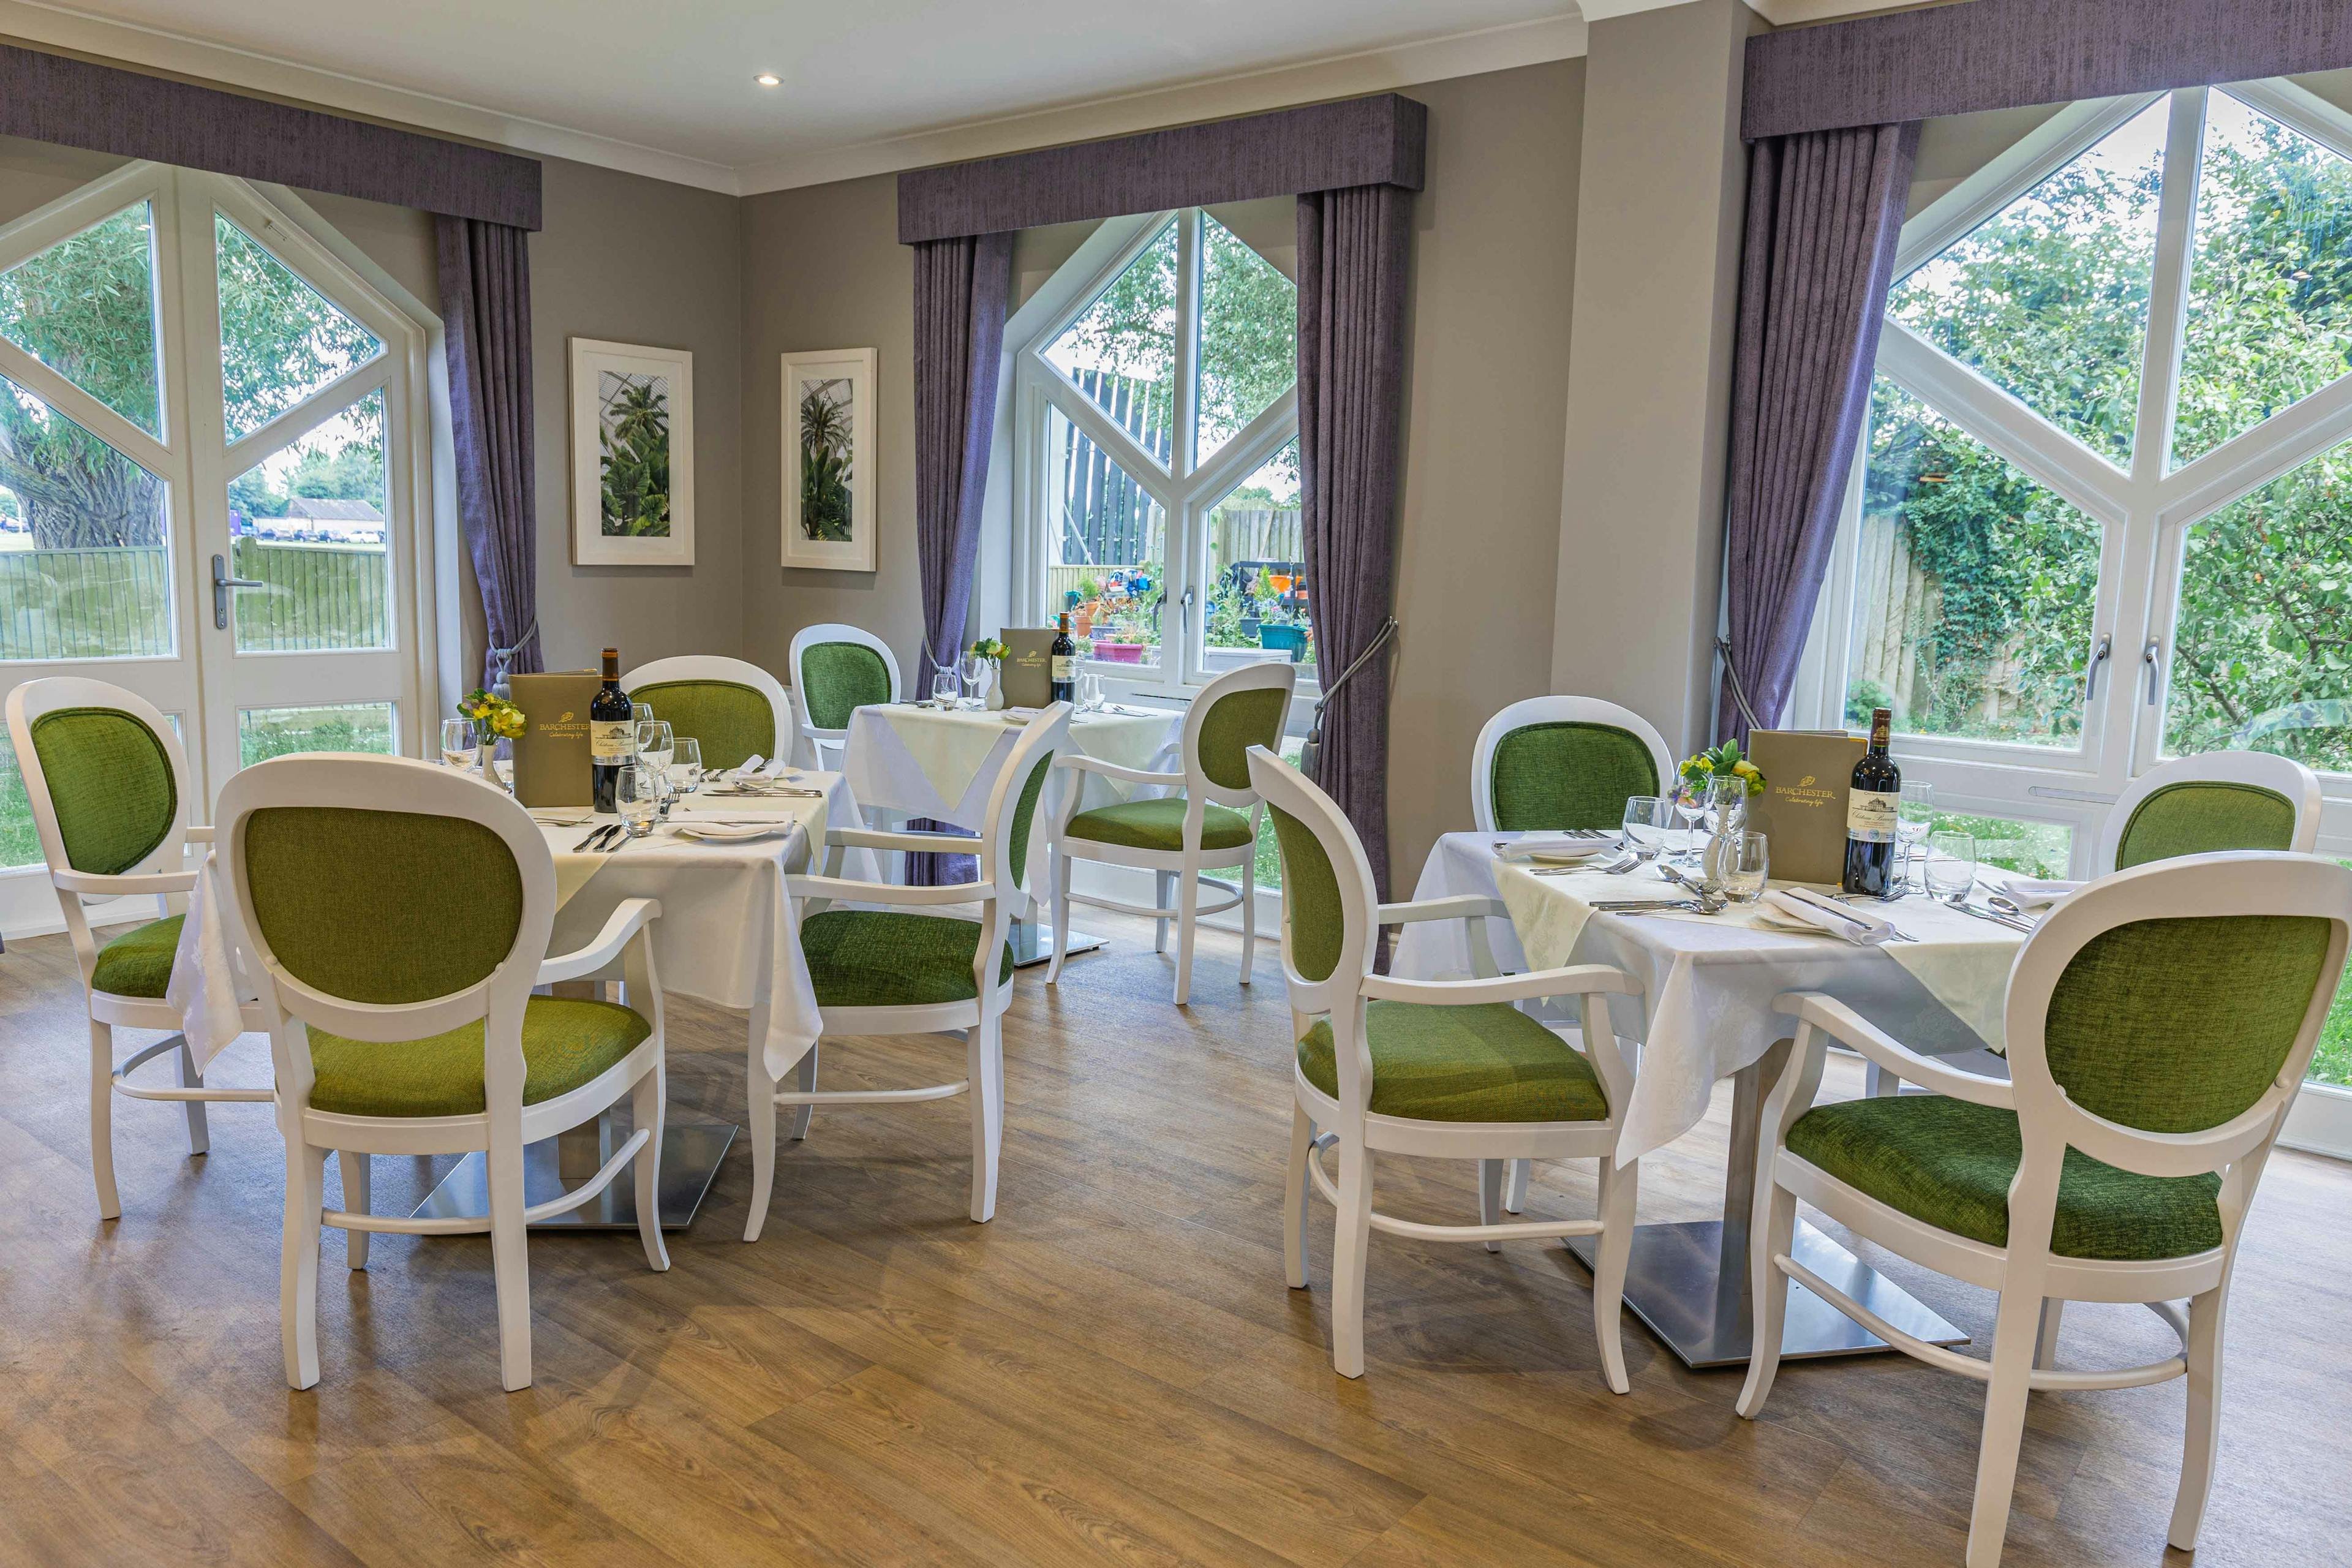 Dining Room at Sutton Valence Care Home in Maidstone, Kent